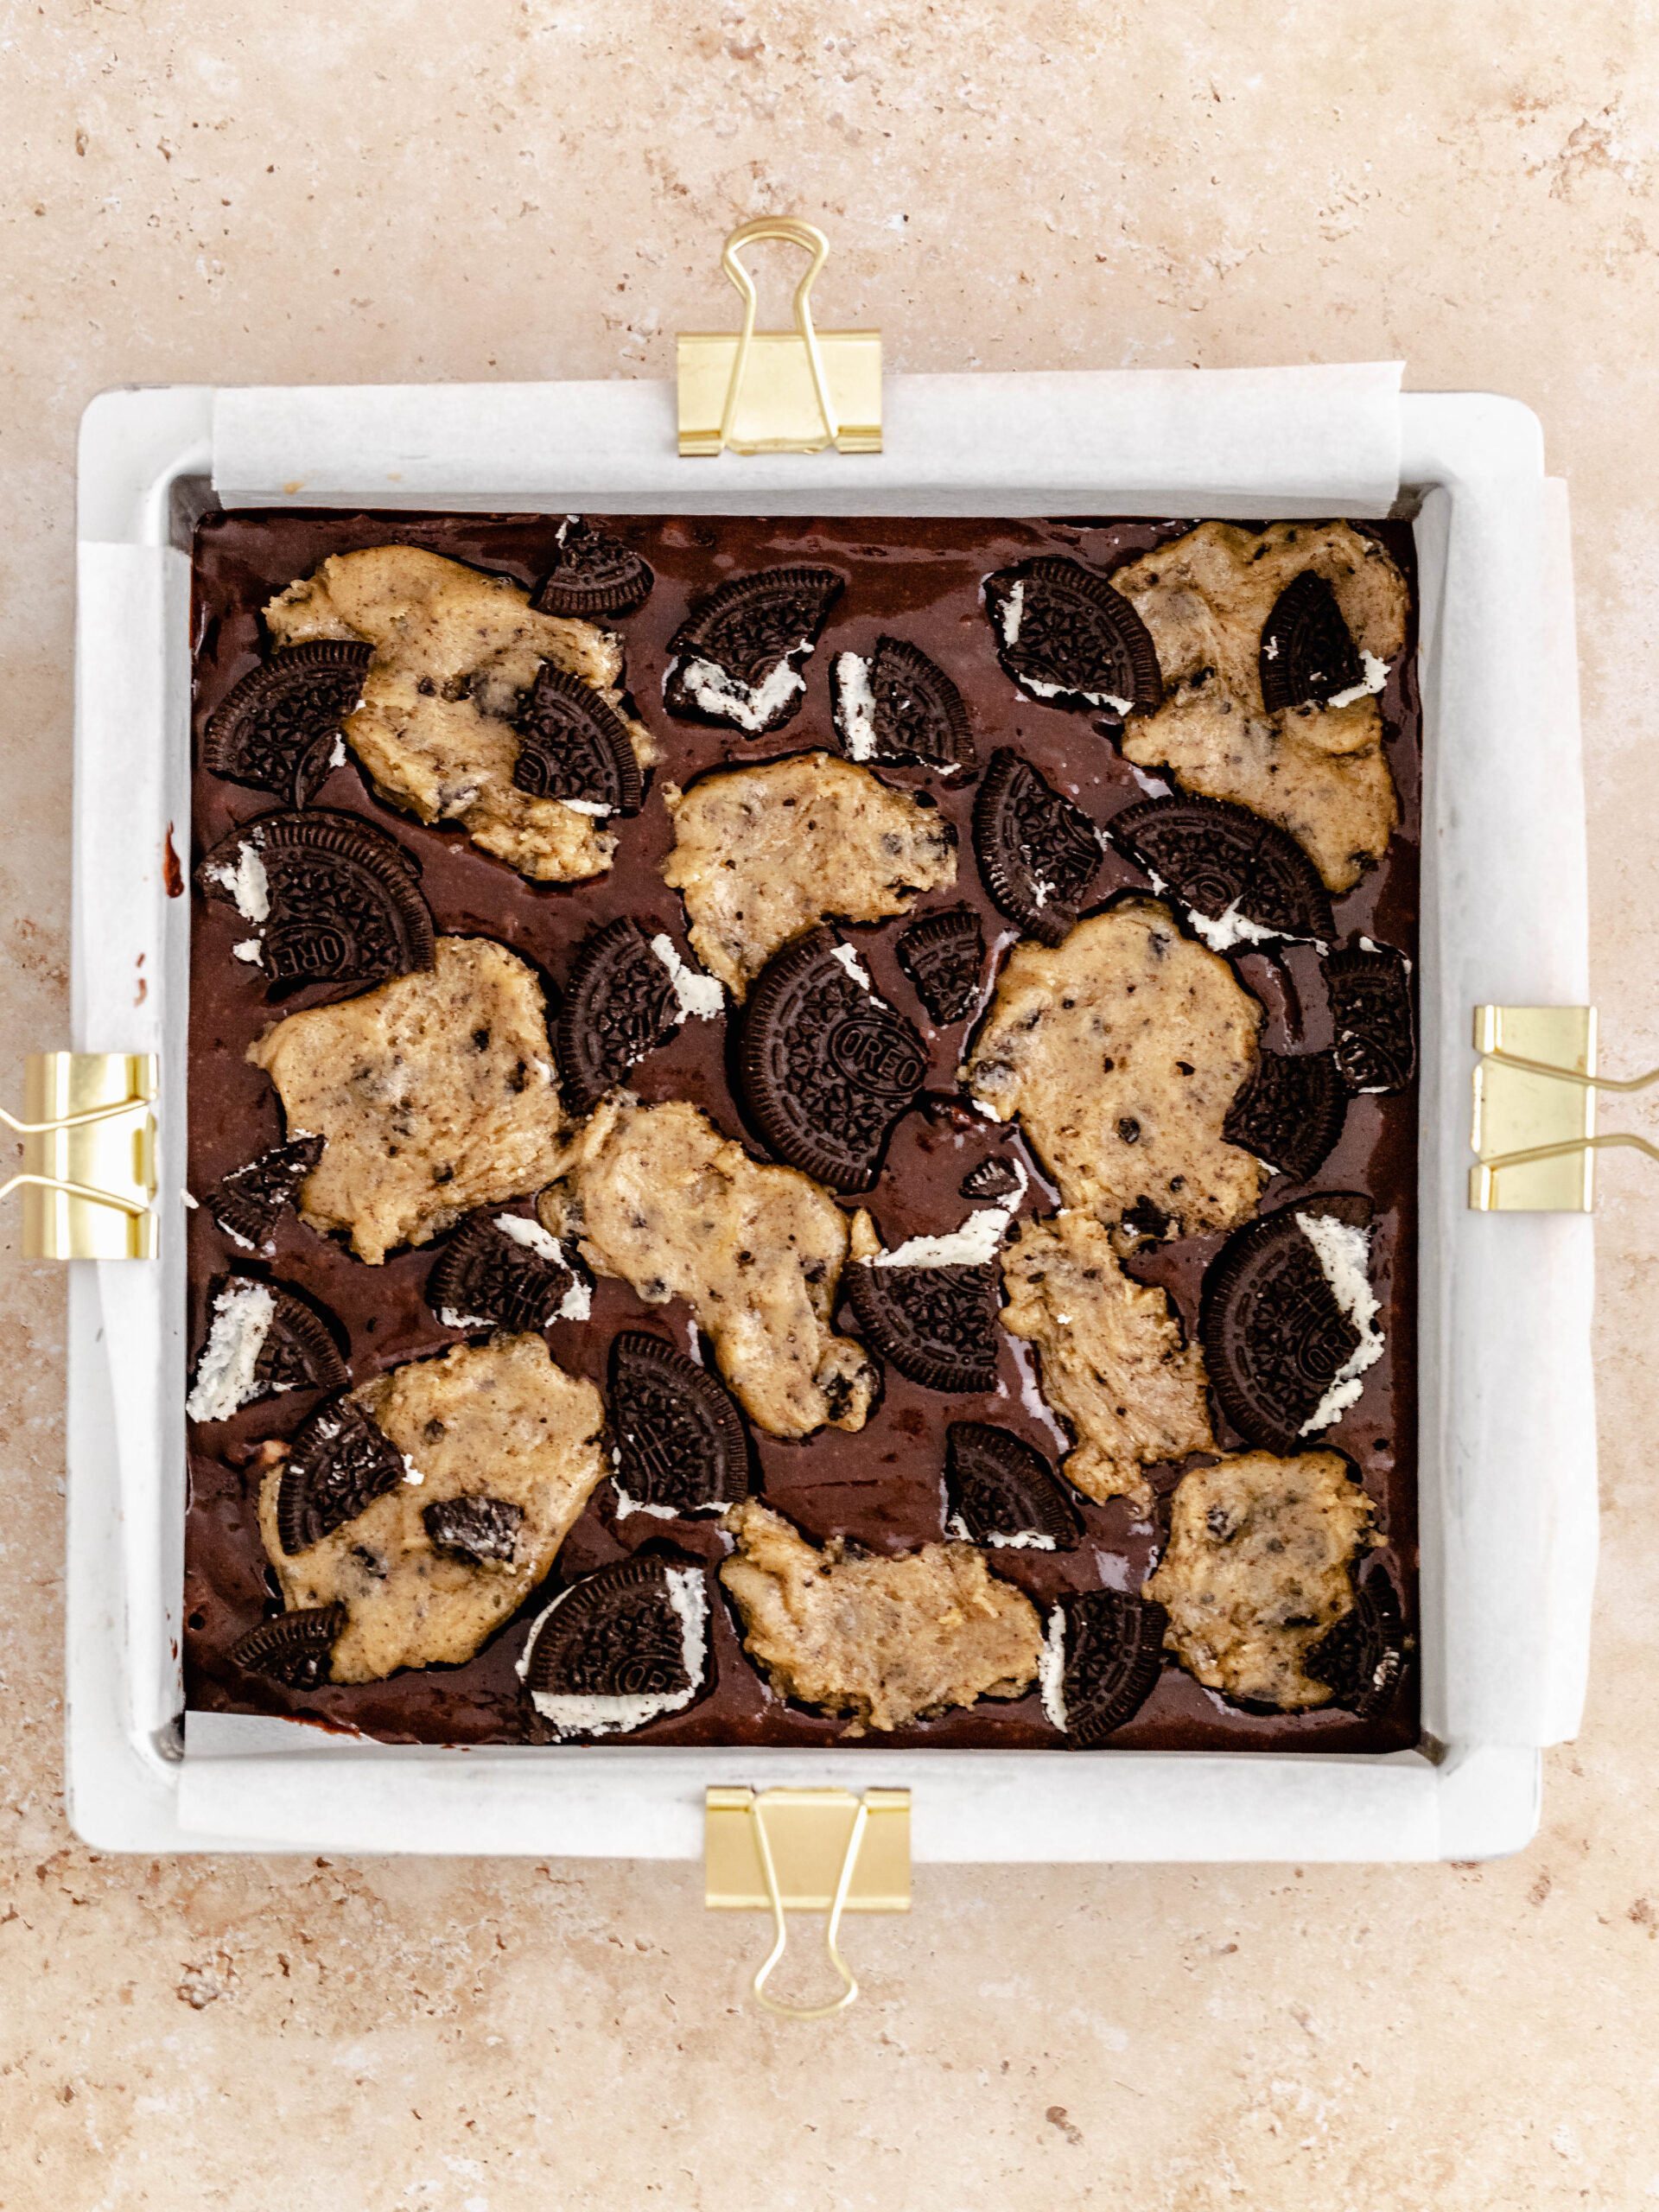 The Oreo brookie assembled in a baking pan.